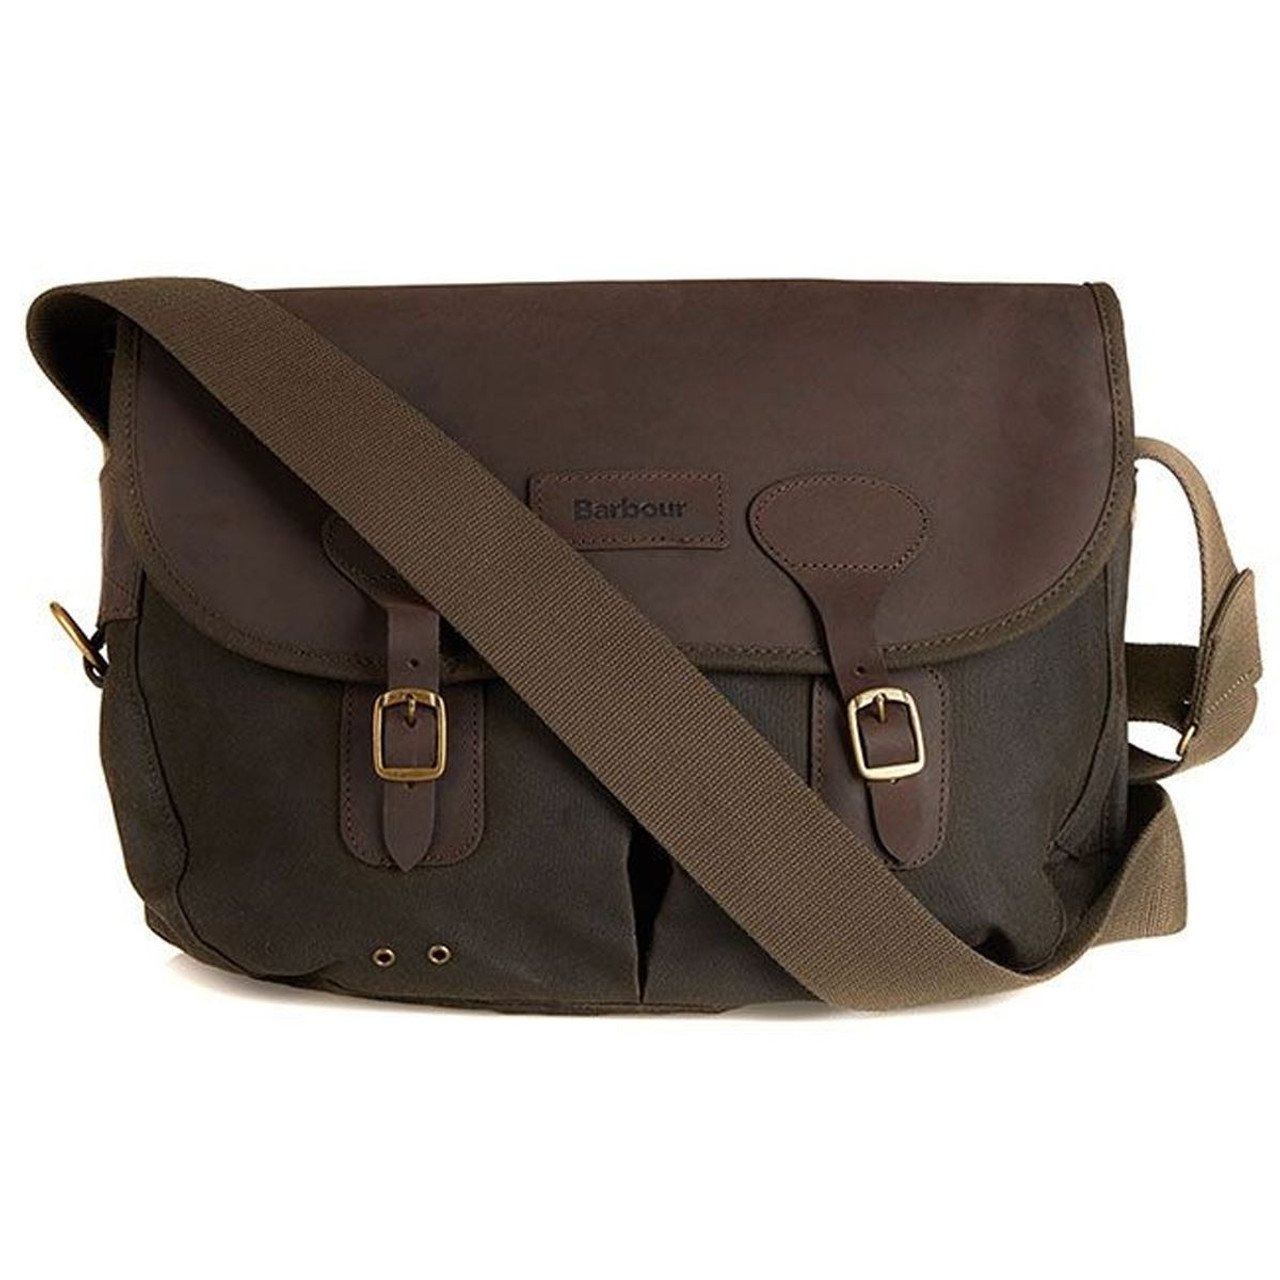 Bags and Luggage - Brands - Barbour - Womens Barbour Bags - Philip ...